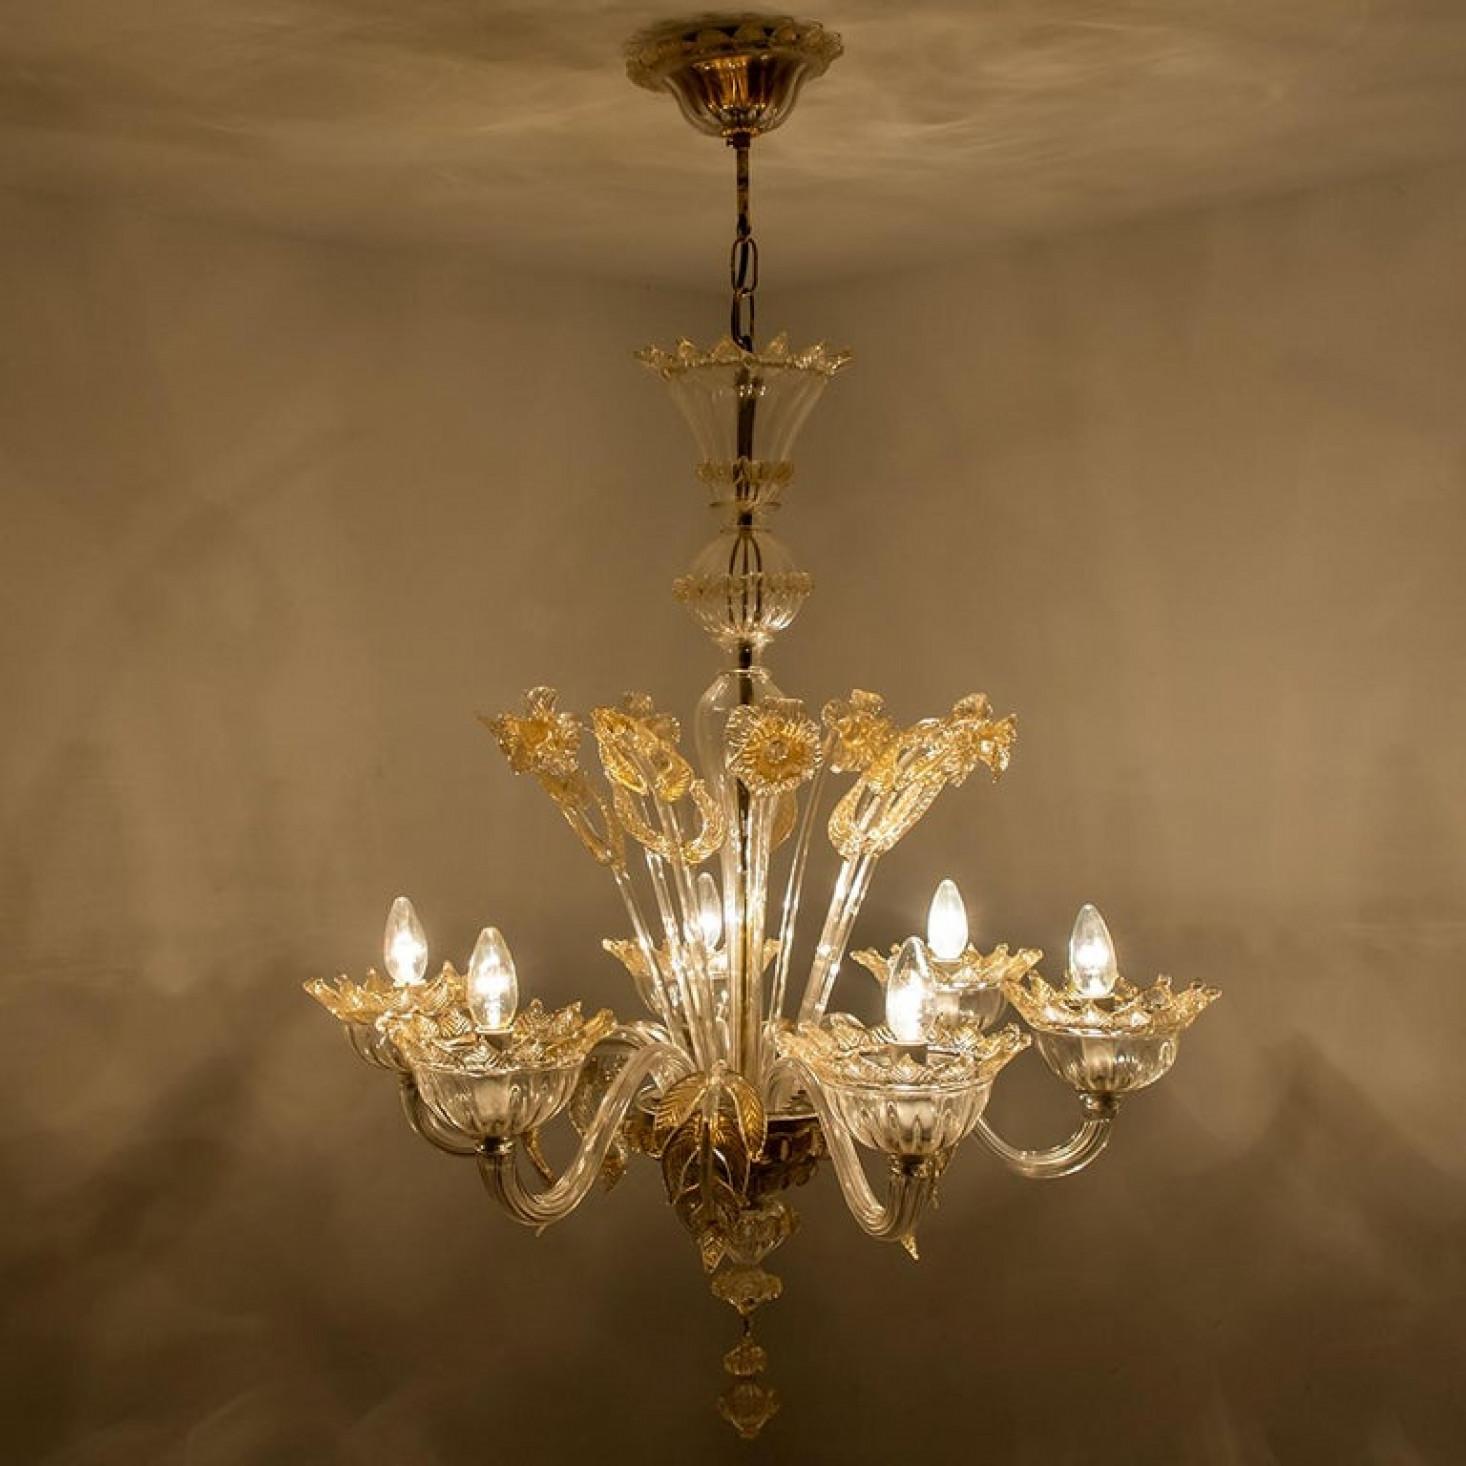 Large Venetian Chandelier in Gilded Murano Glass, by Barovier, 1950s For Sale 12